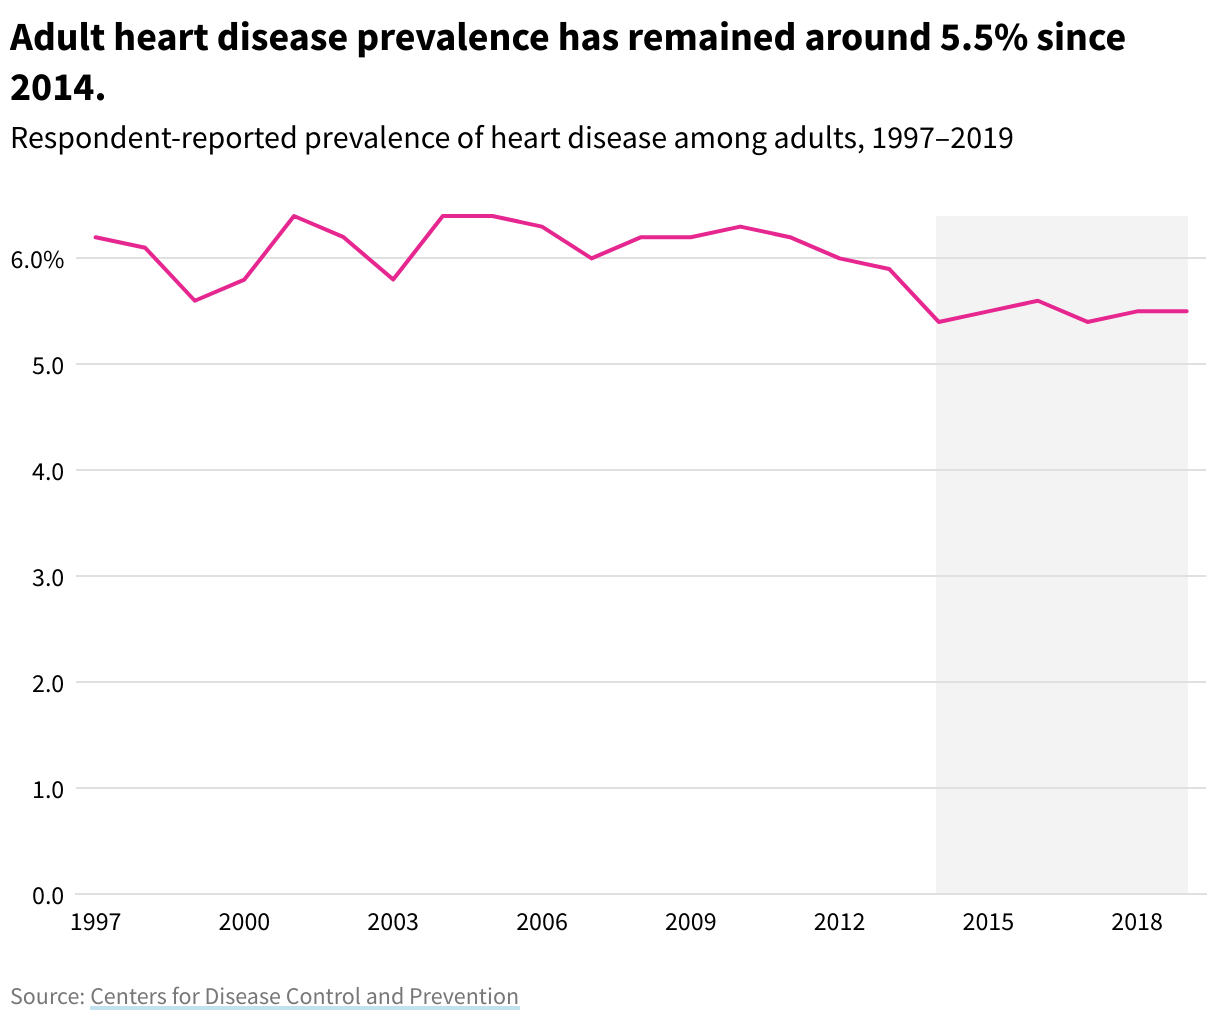 A line chart showing the prevalence of heart disease in adults from 1997 to 2019. Adult heart disease prevalence has remained around 5.5% since 2014.